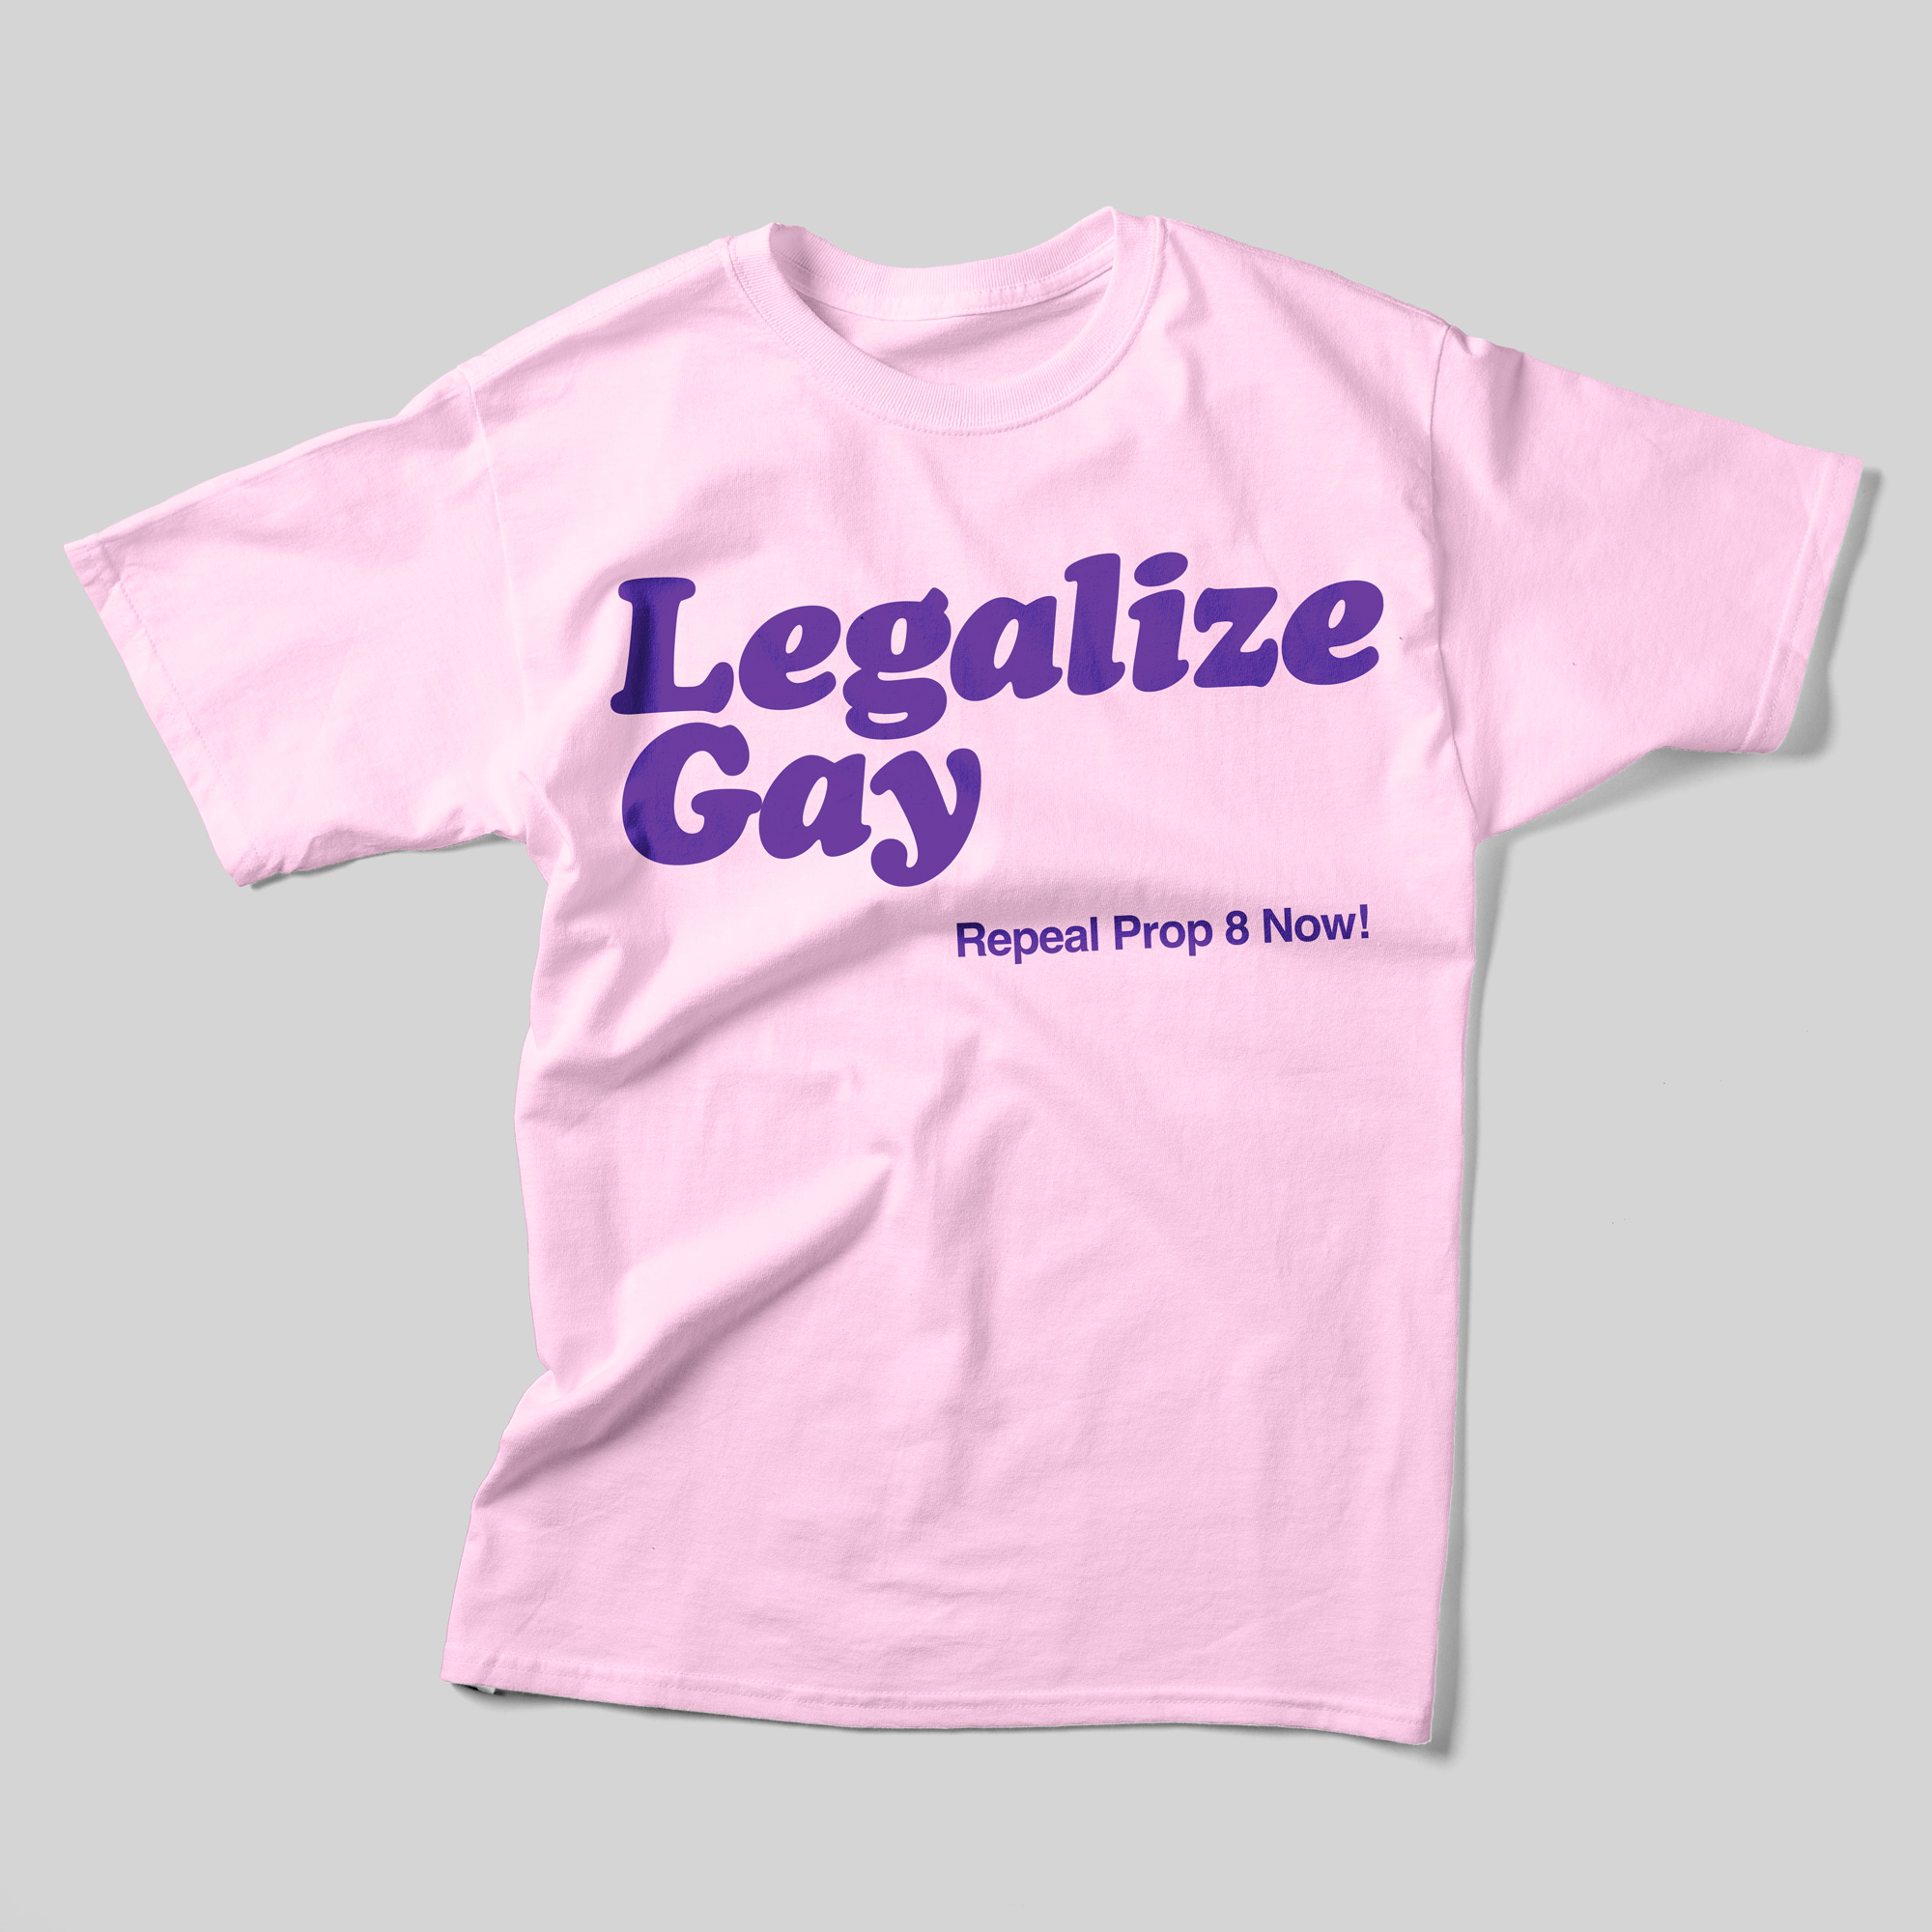 A pink t-shirt that reads Legalize Gay with Repeal Prop 8 Now! beneath it in purple text.